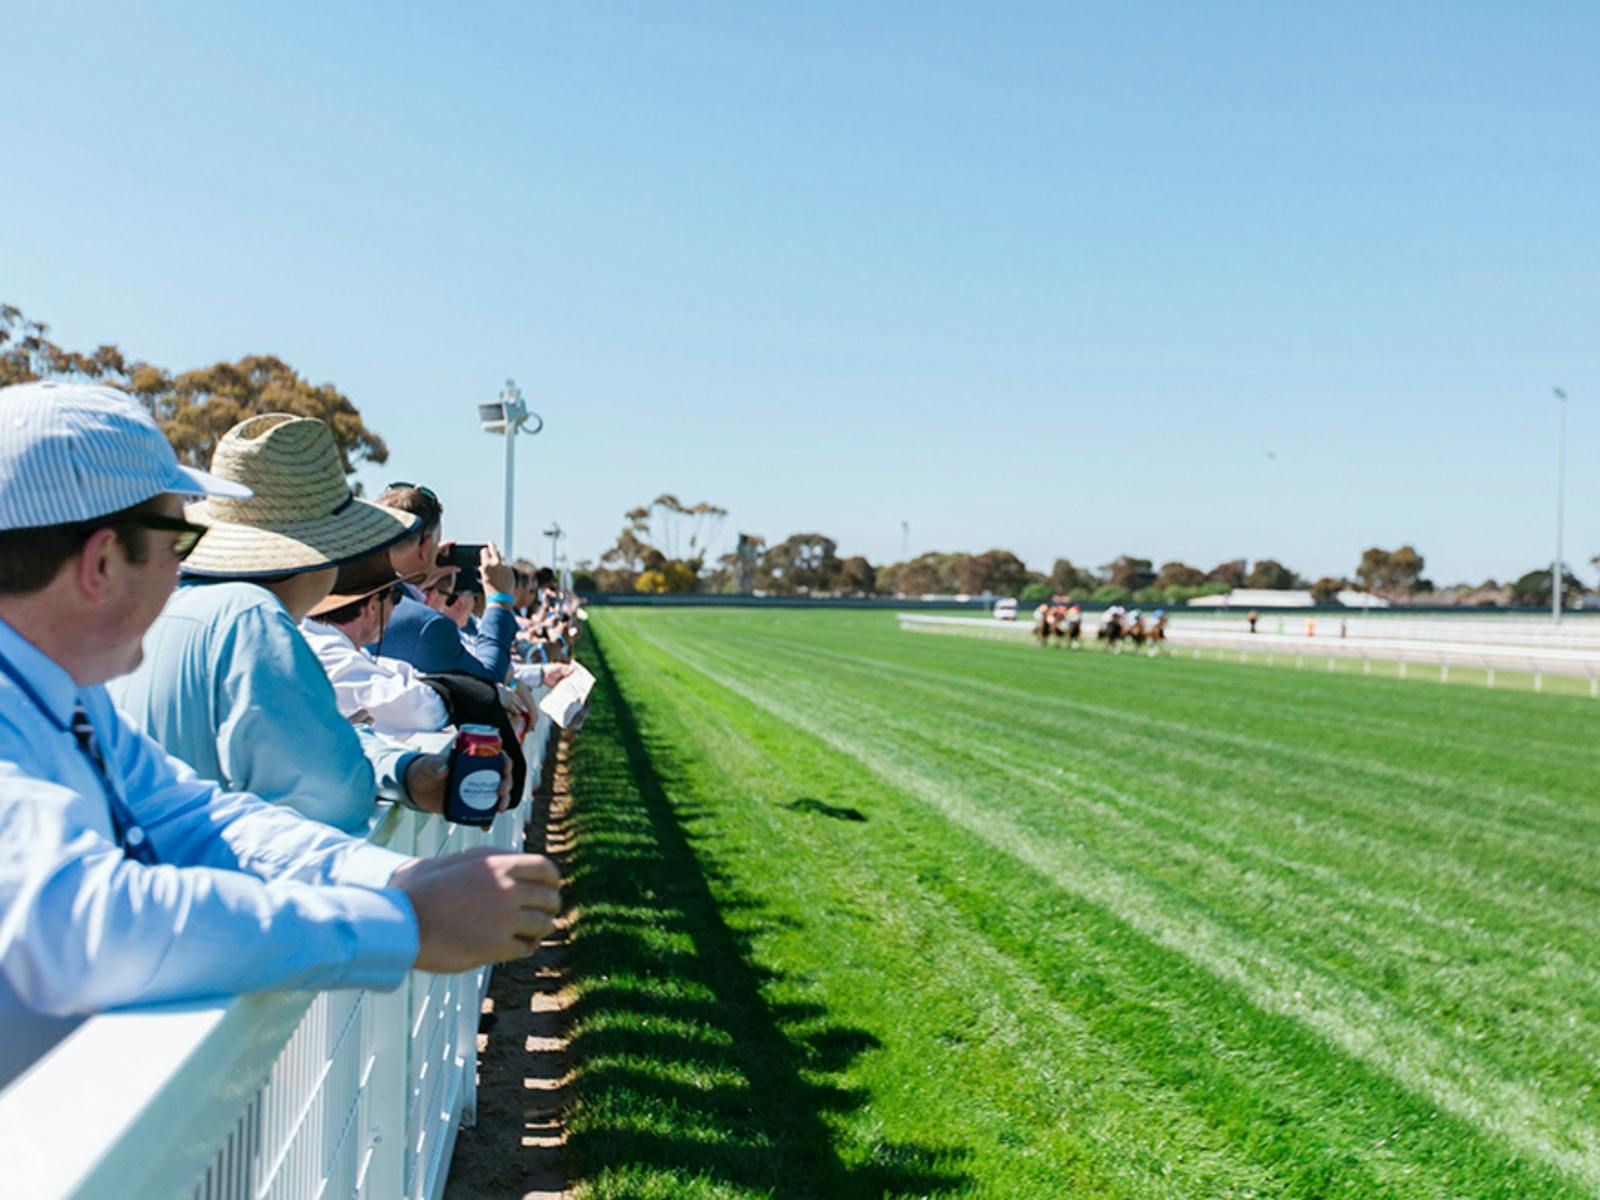 The Geelong Racing Club offers up close experience of the horse racing action